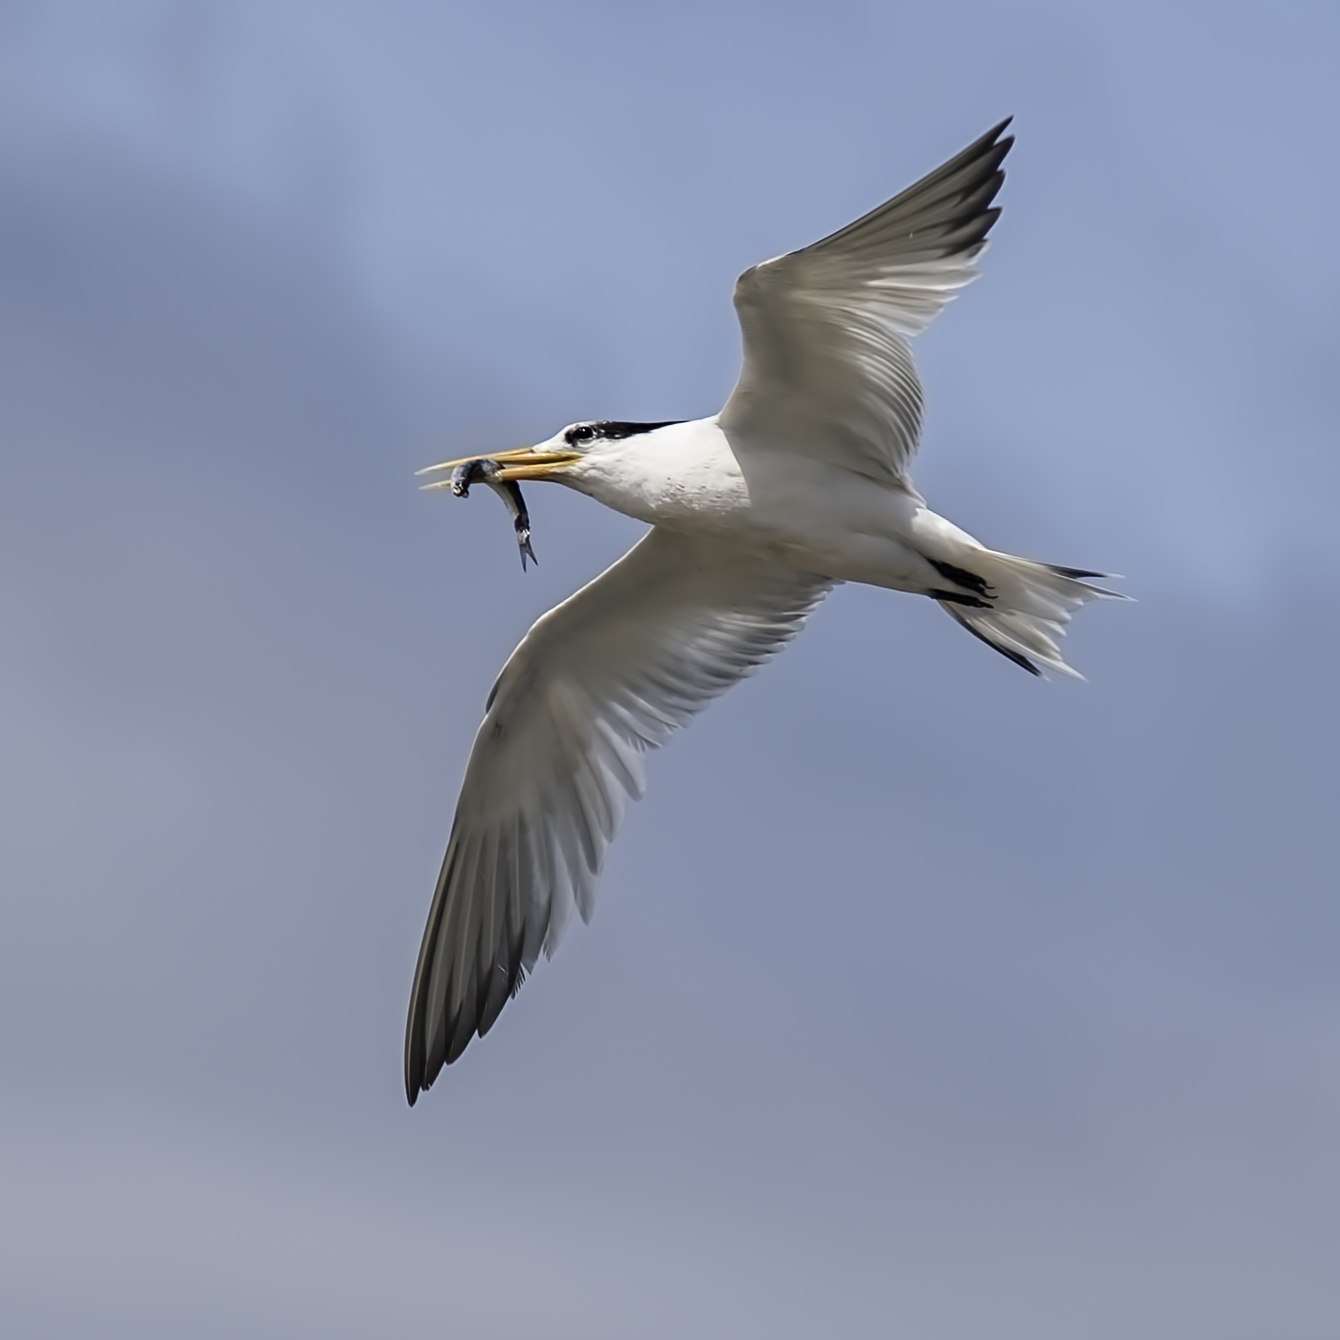 Tern with Fish - Common tern in flight, with fish in beak by Denise Buckley Crawford